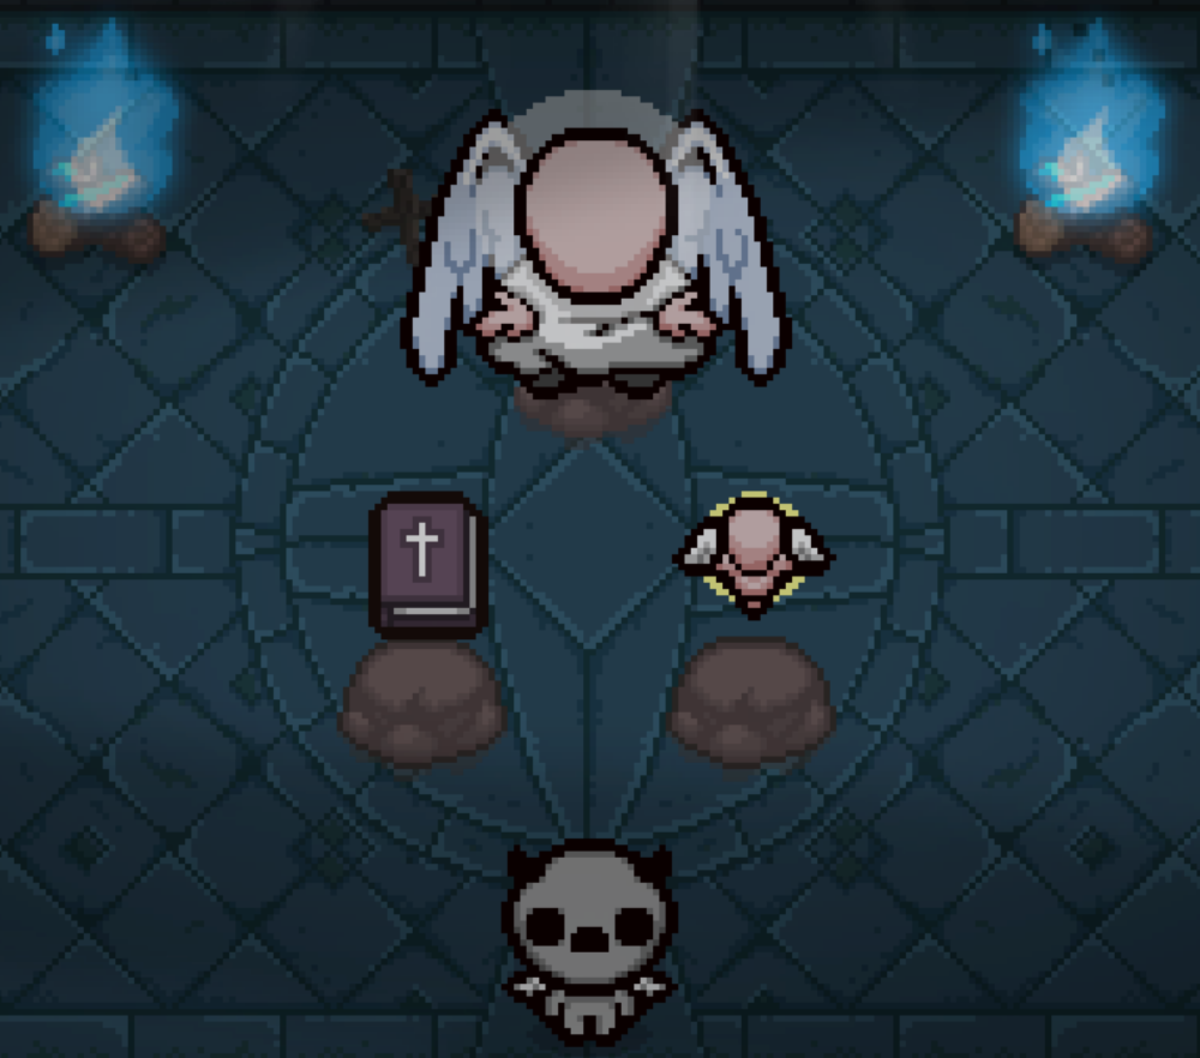 These are some items in an angel room.